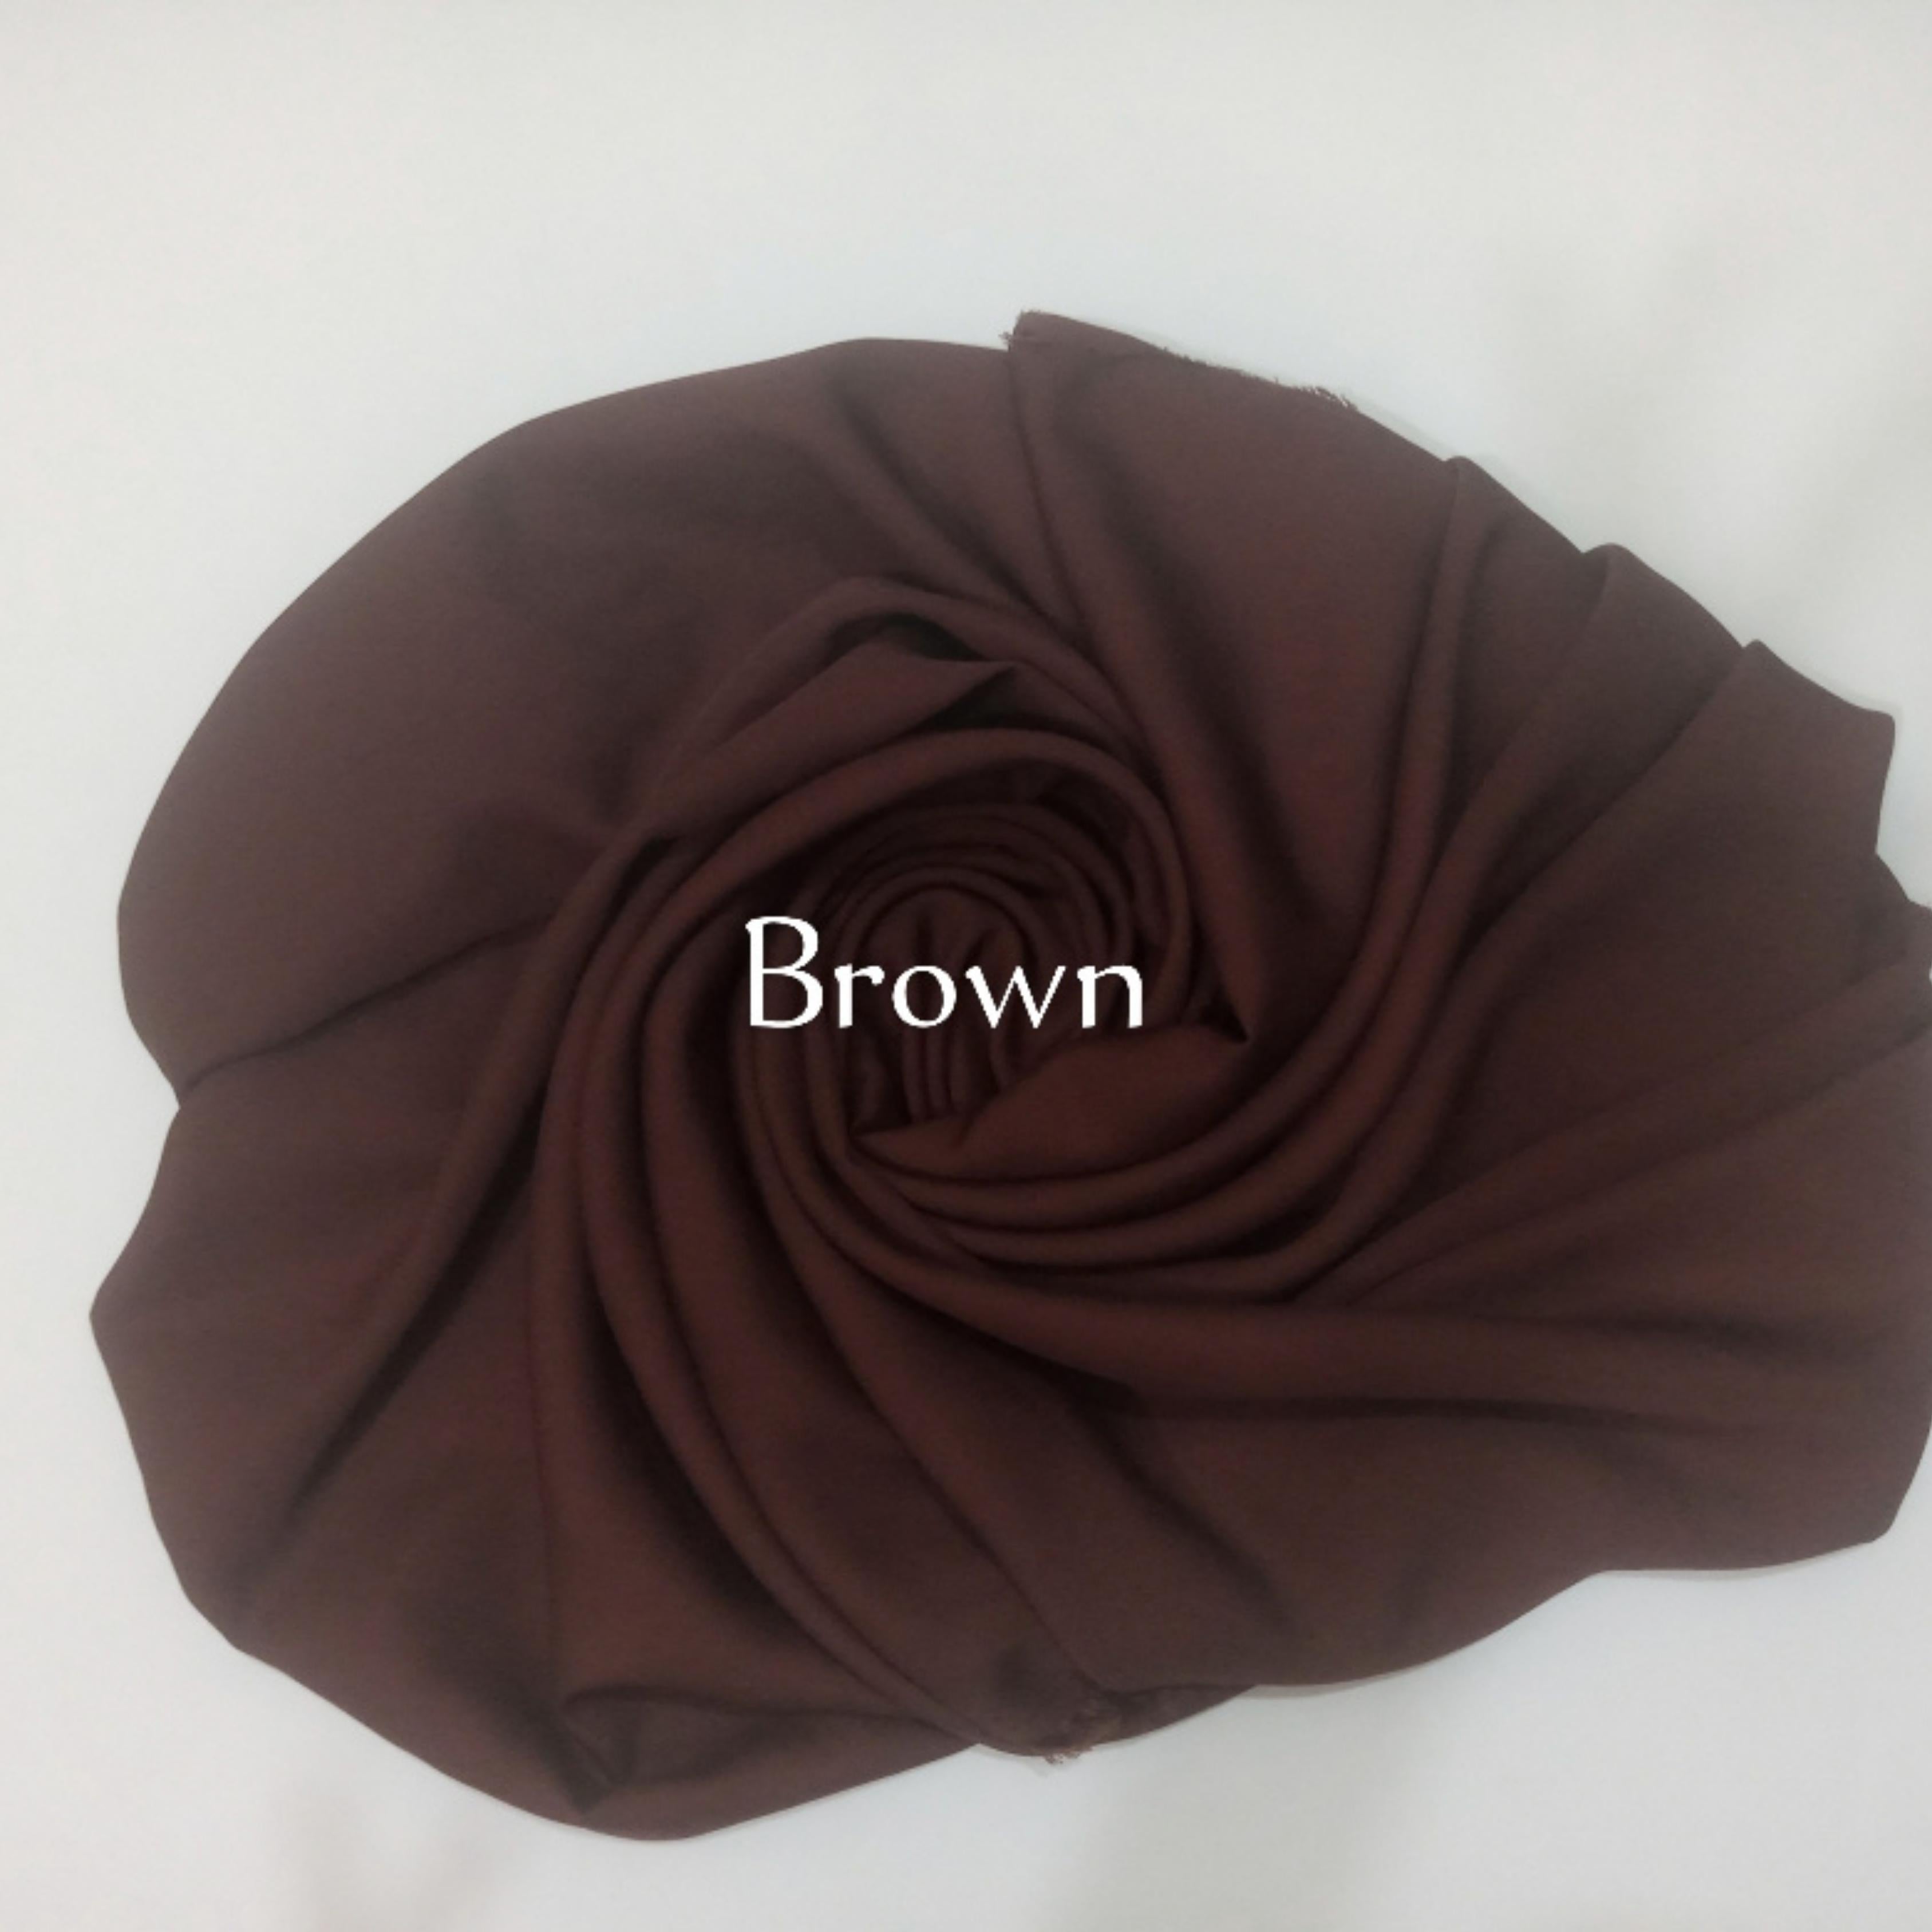 Misri Hijab With Attached Niqab with same color head undercap